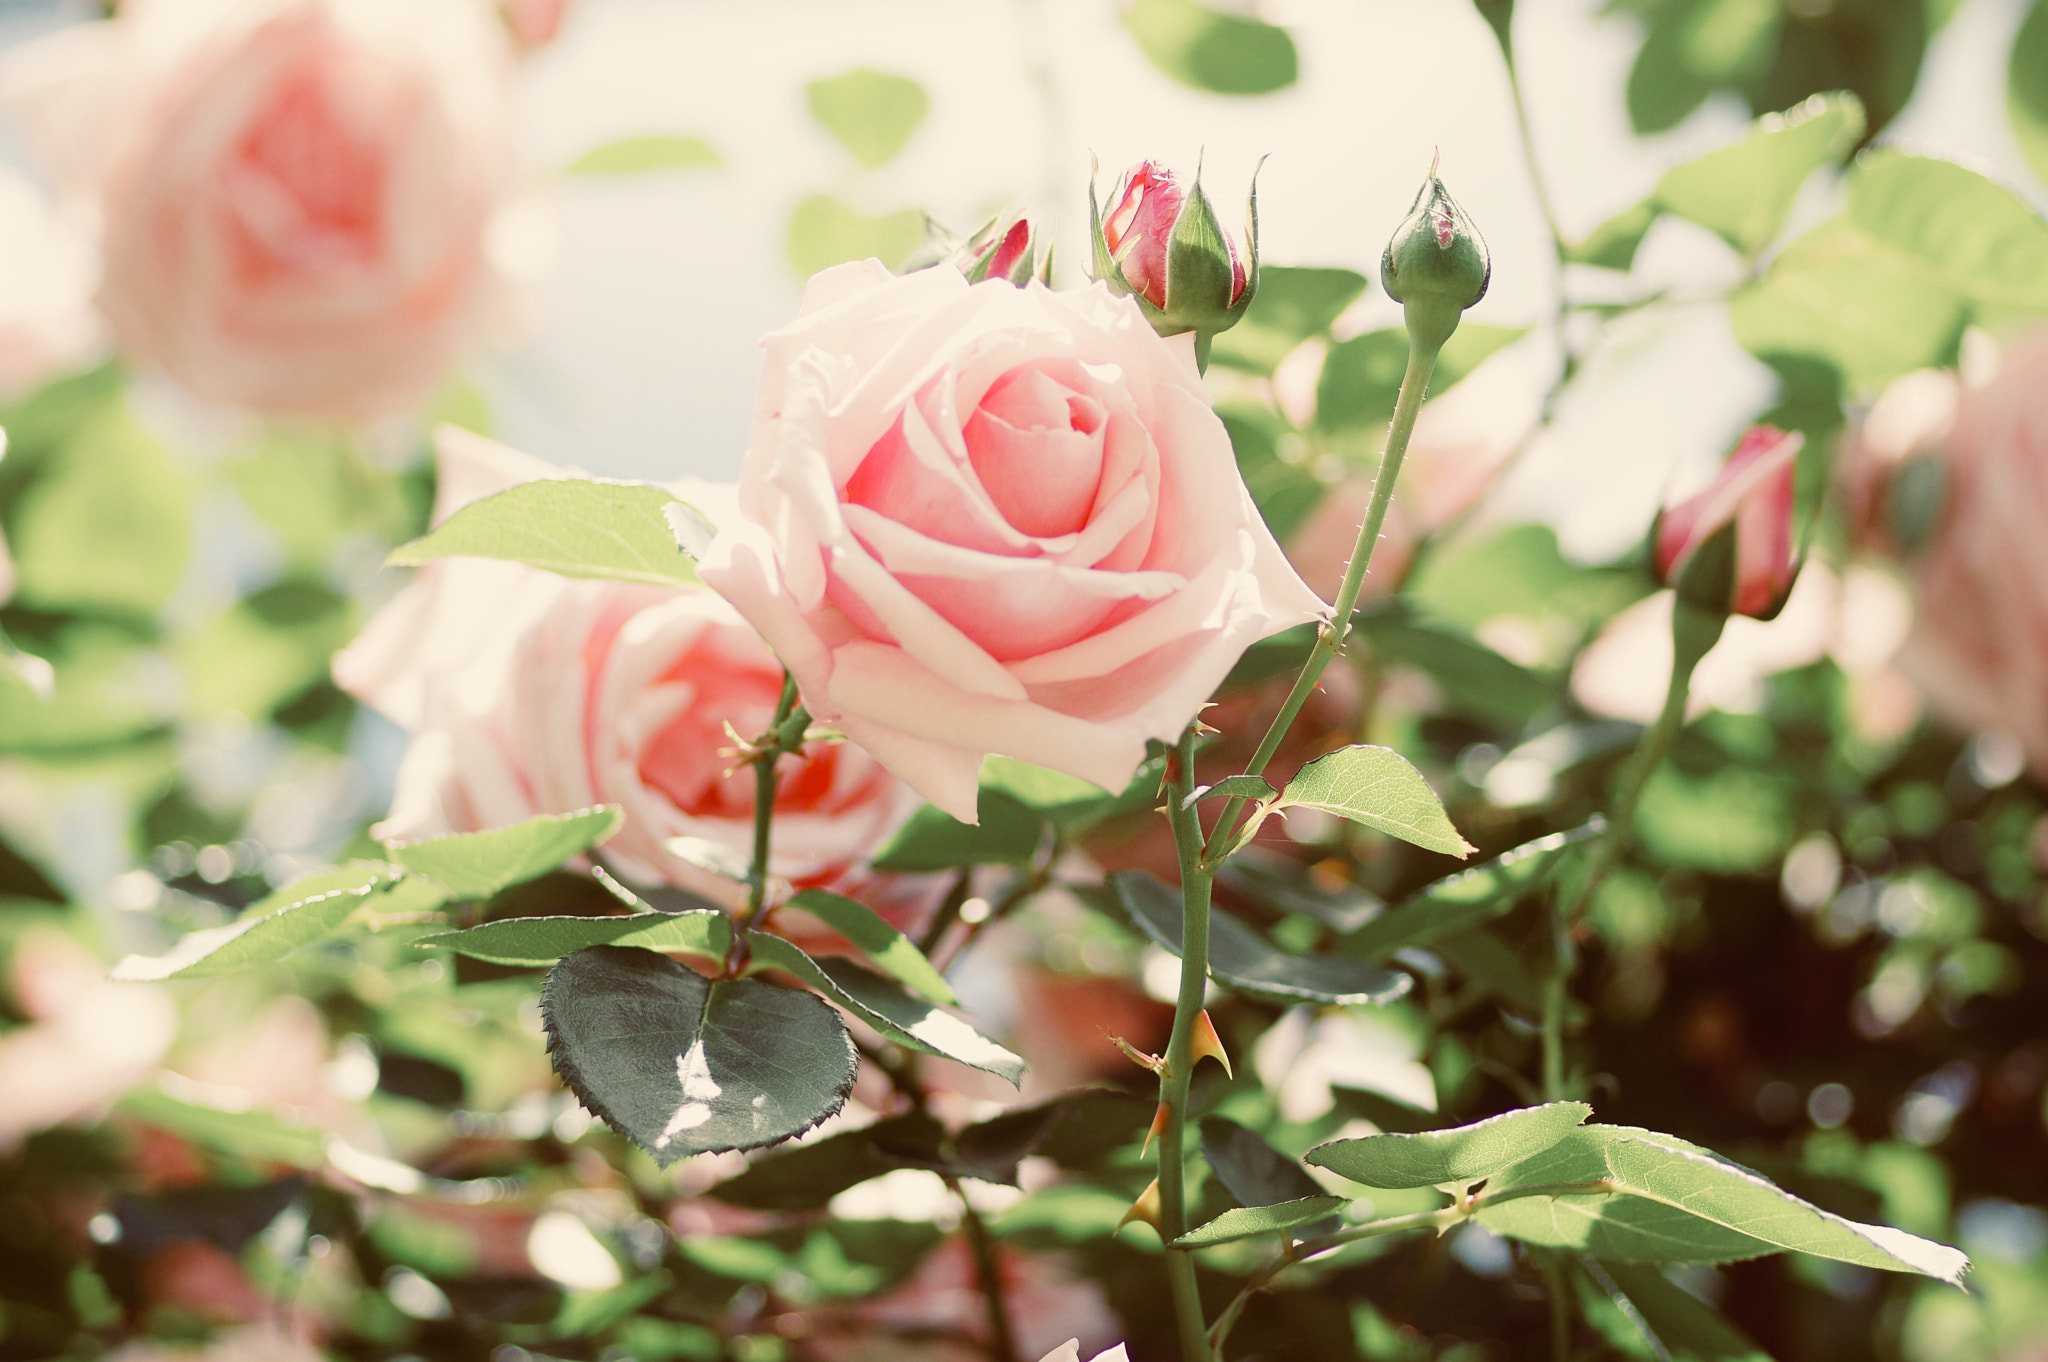 Pentax K-3 II sample photo. Nostalgia air feeling with pink roses photography